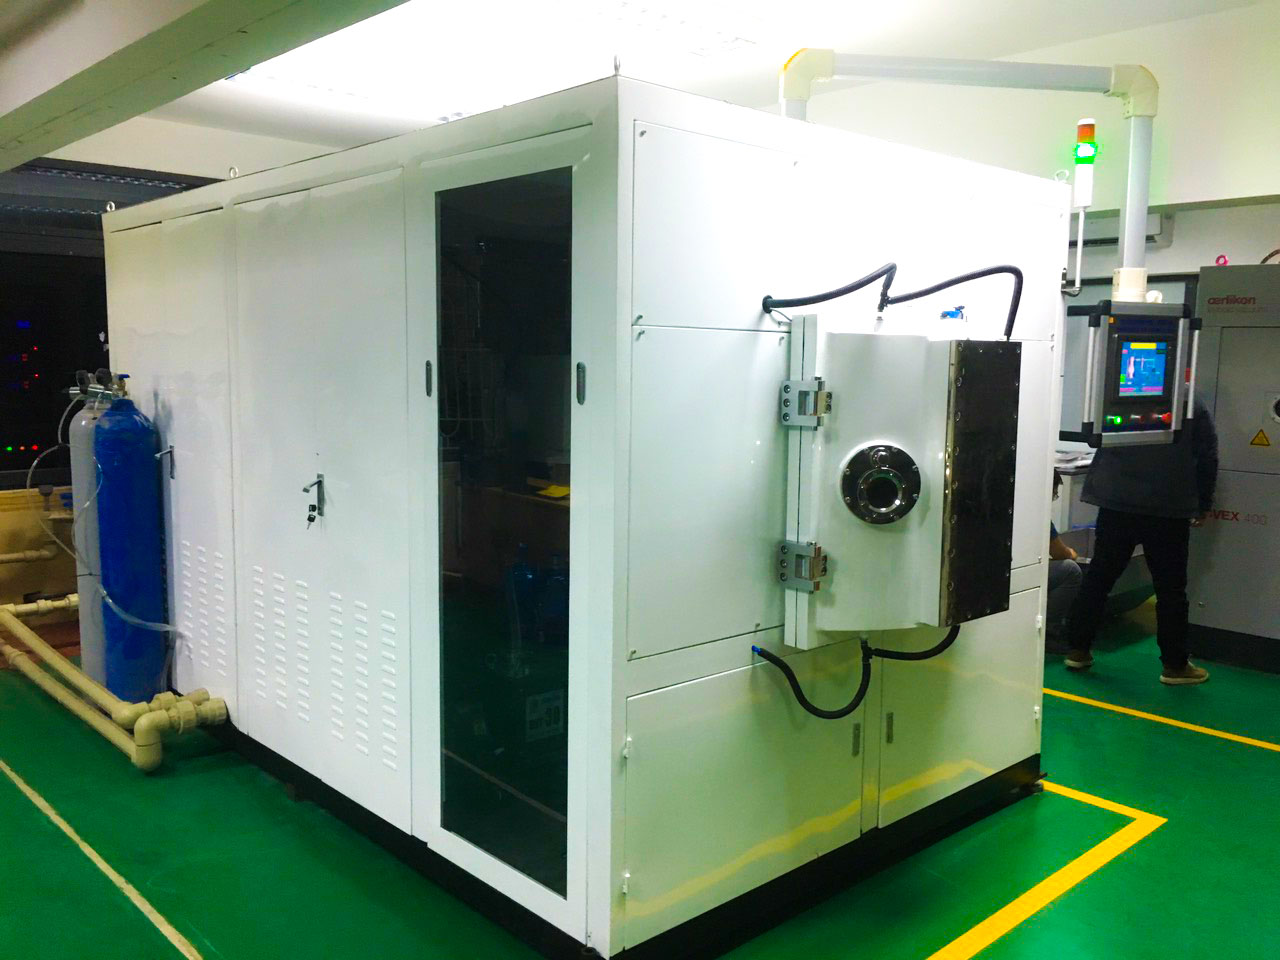 Successfully researched, designed and manufactured PVD vacuum coating equipment for supporting industry